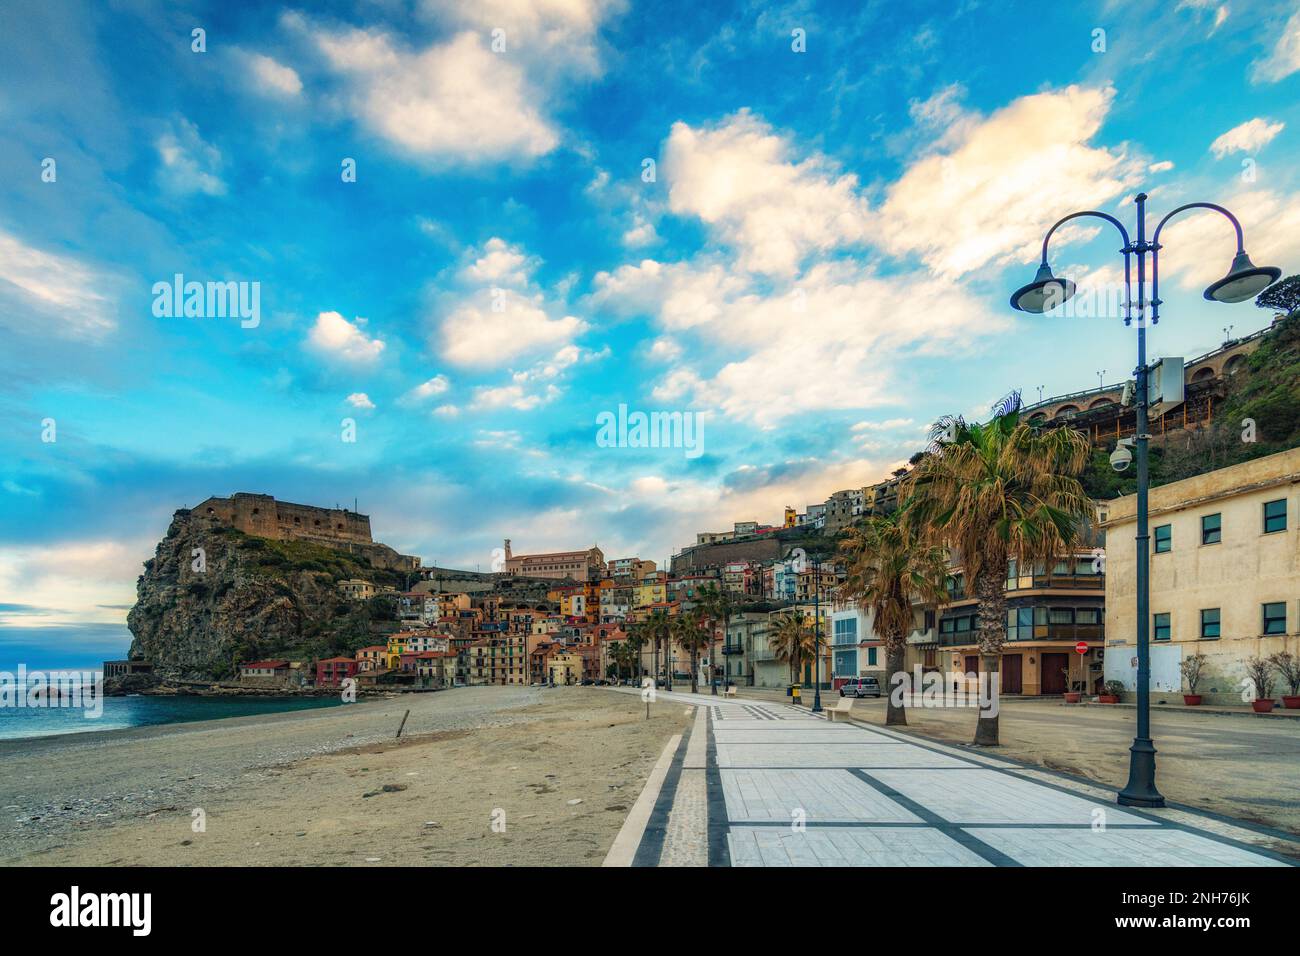 The seaside village of Scilla seen from the seafront at first morning lights, Calabria Stock Photo